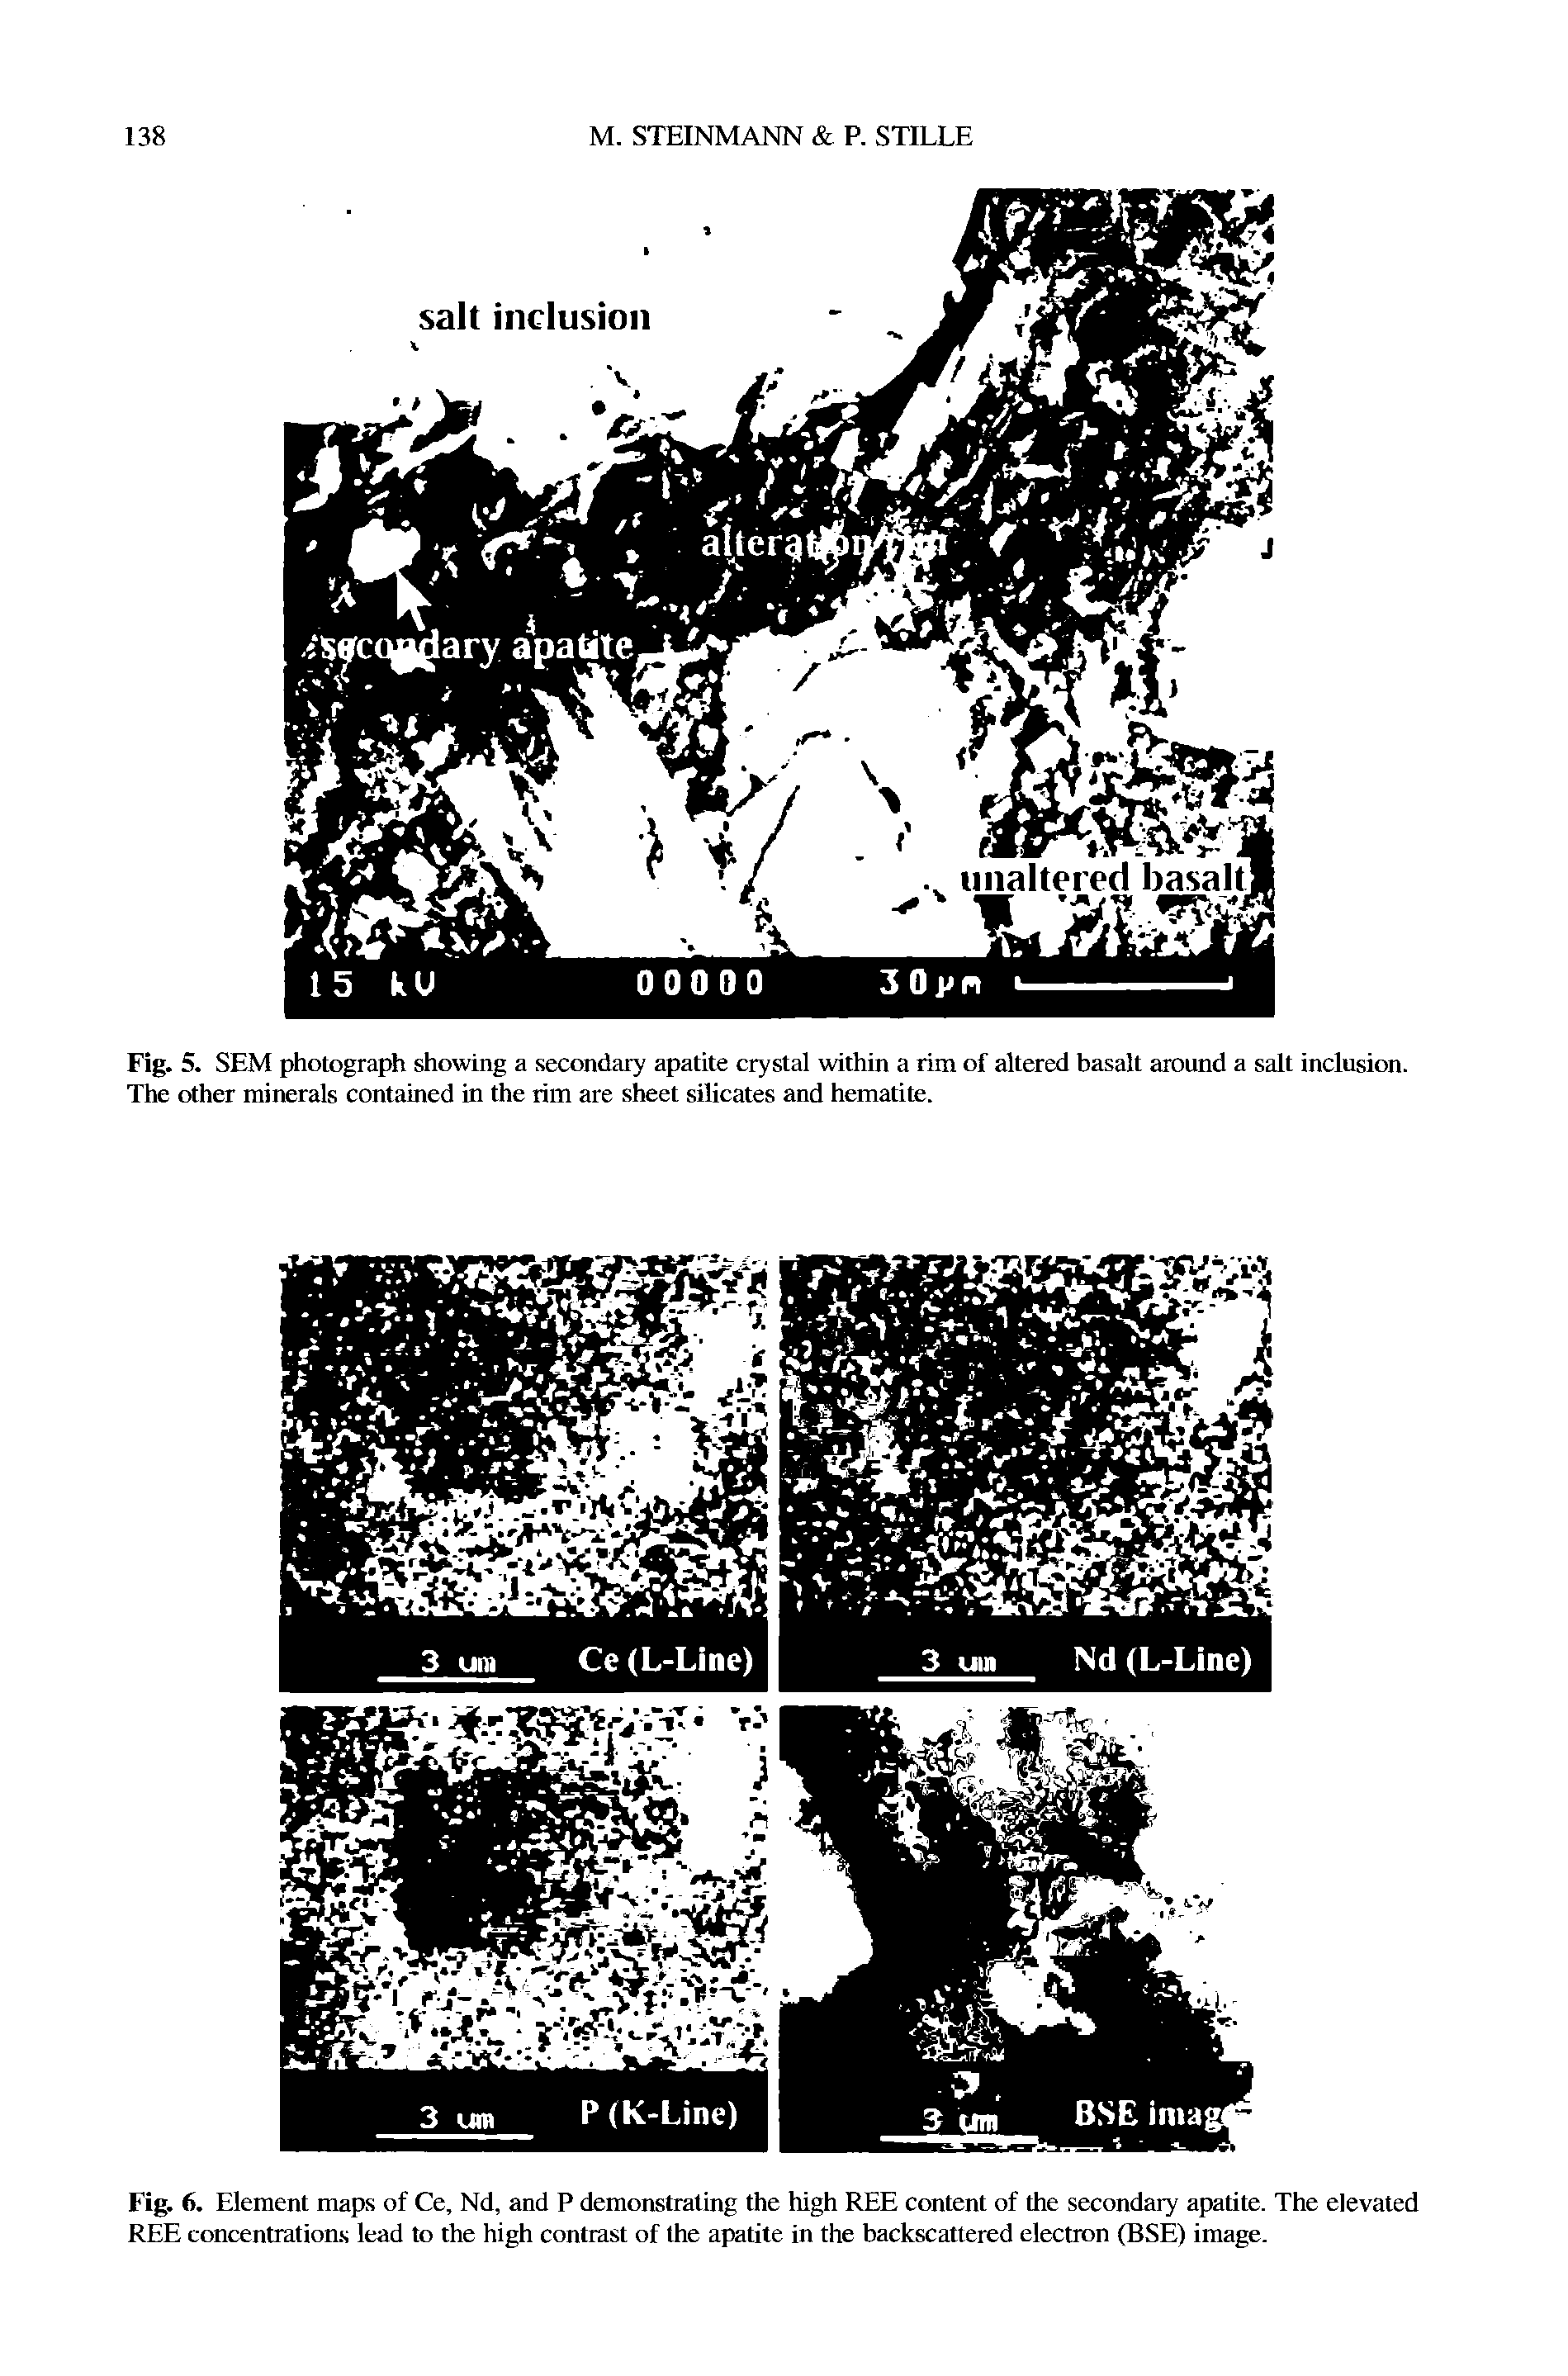 Fig. 6. Element maps of Ce, Nd, and P demonstrating the high REE content of the secondary apatite. The elevated REE concentrations lead to the high contrast of the apatite in the backscattered electron (BSE) image.